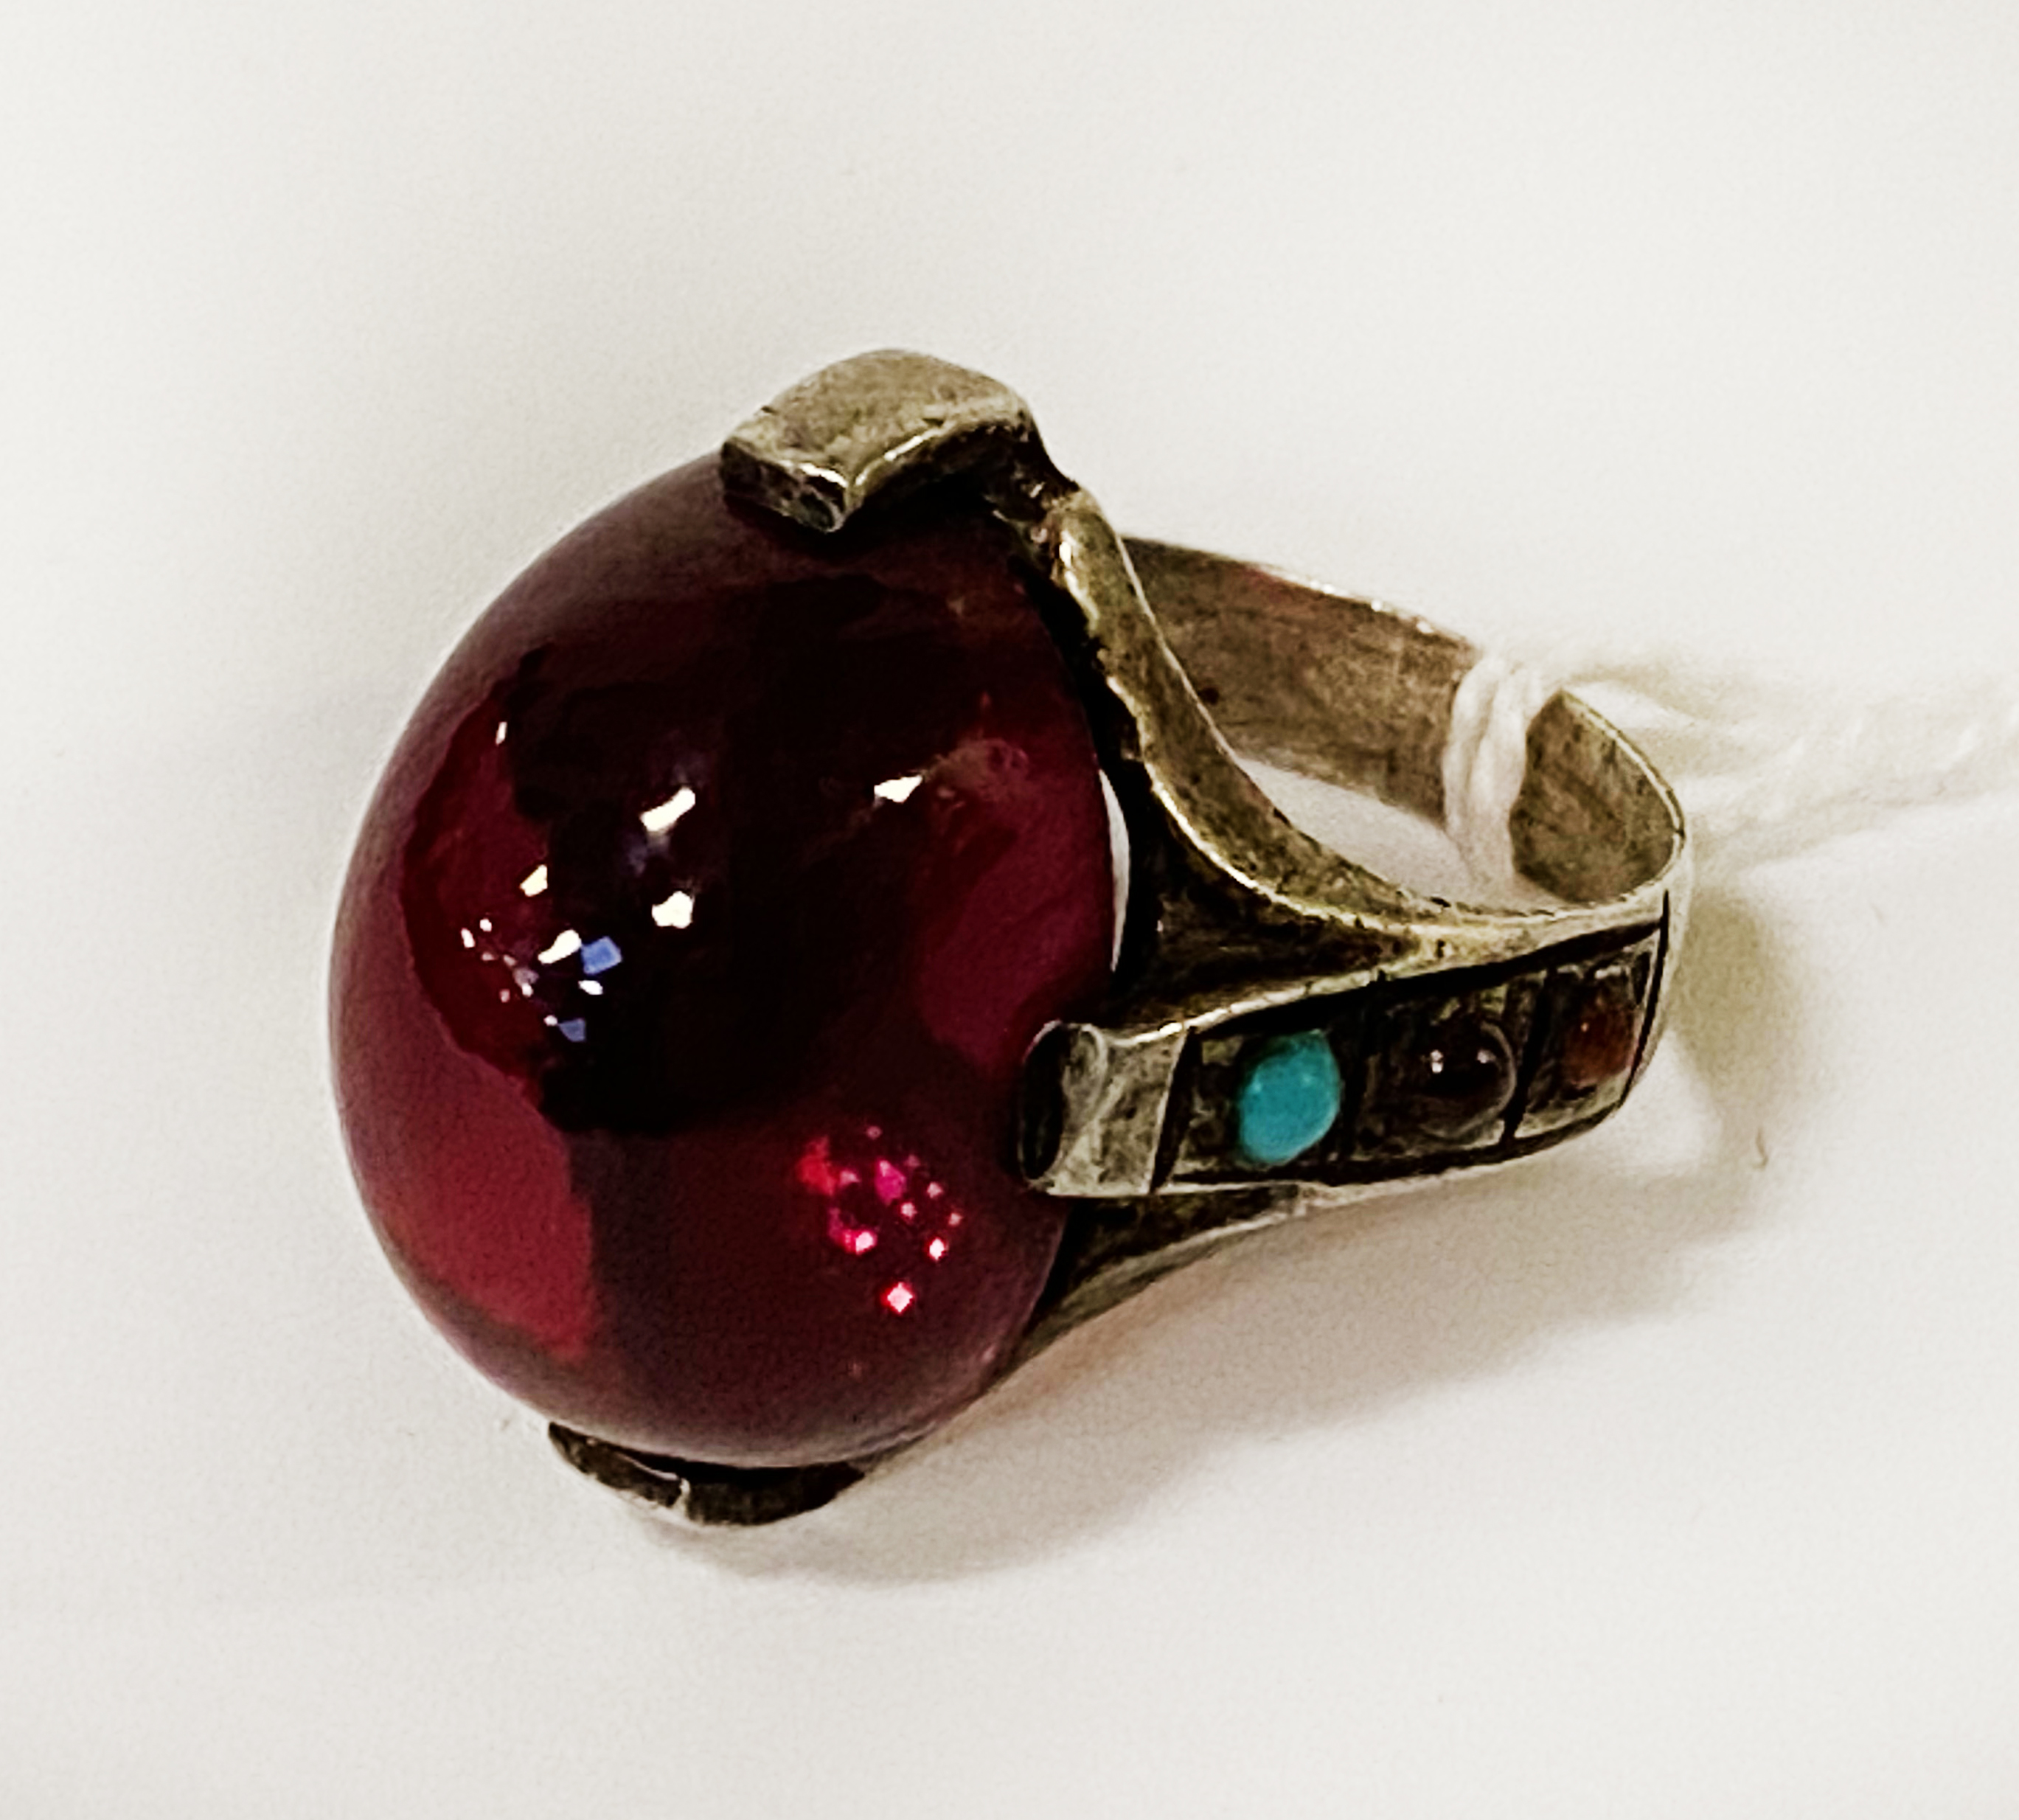 ANTIQUE IRANIAN SILVER & CABACHON RUBY RING WITH TURQUOISE & OTHER SEMI-PRECIOUS STONES TO THE